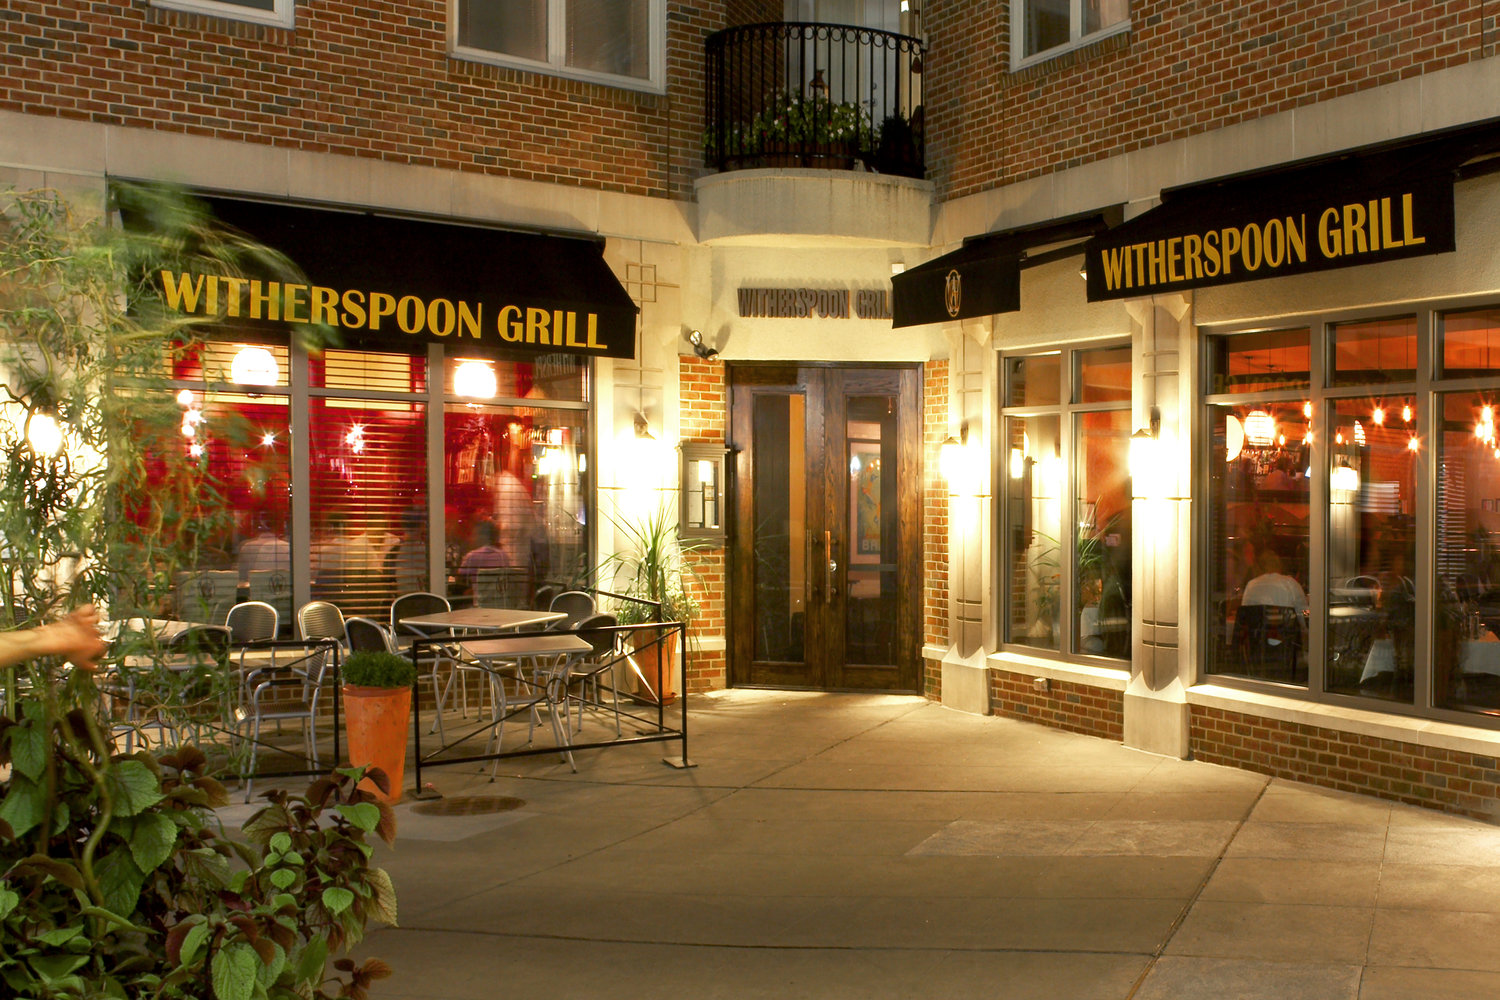 Outdoor Seating at the Witherspoon Grill in Princeton